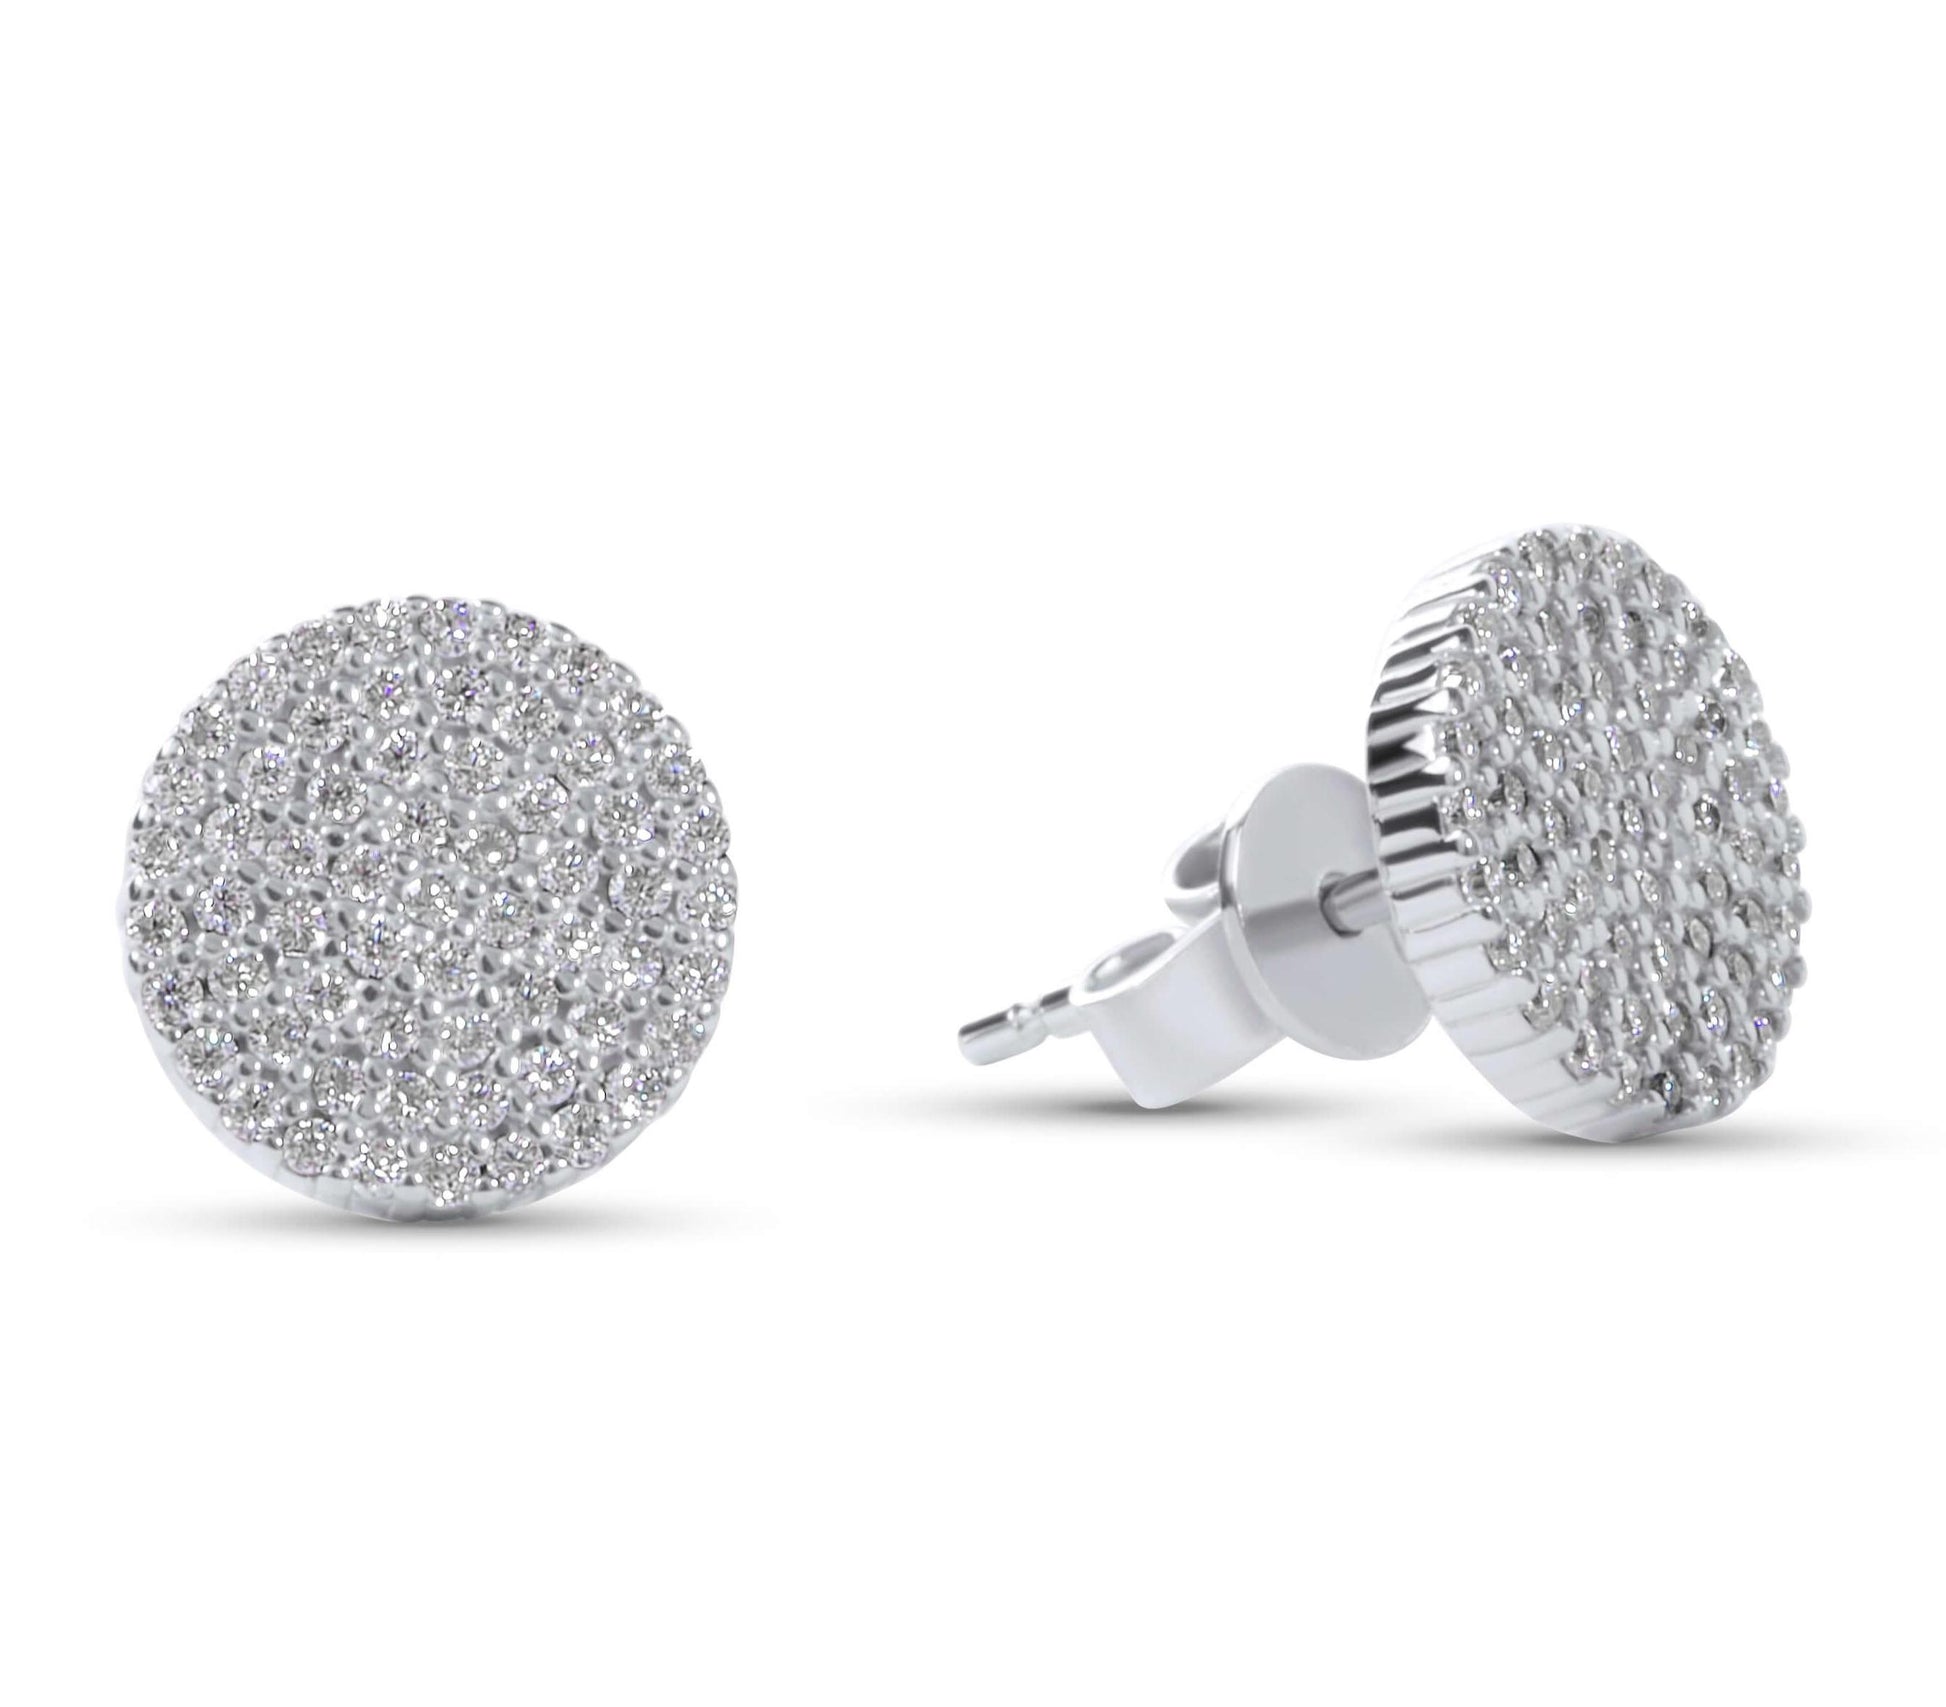 Amaral Pave Stud Moissanite Silver Earrings on white background